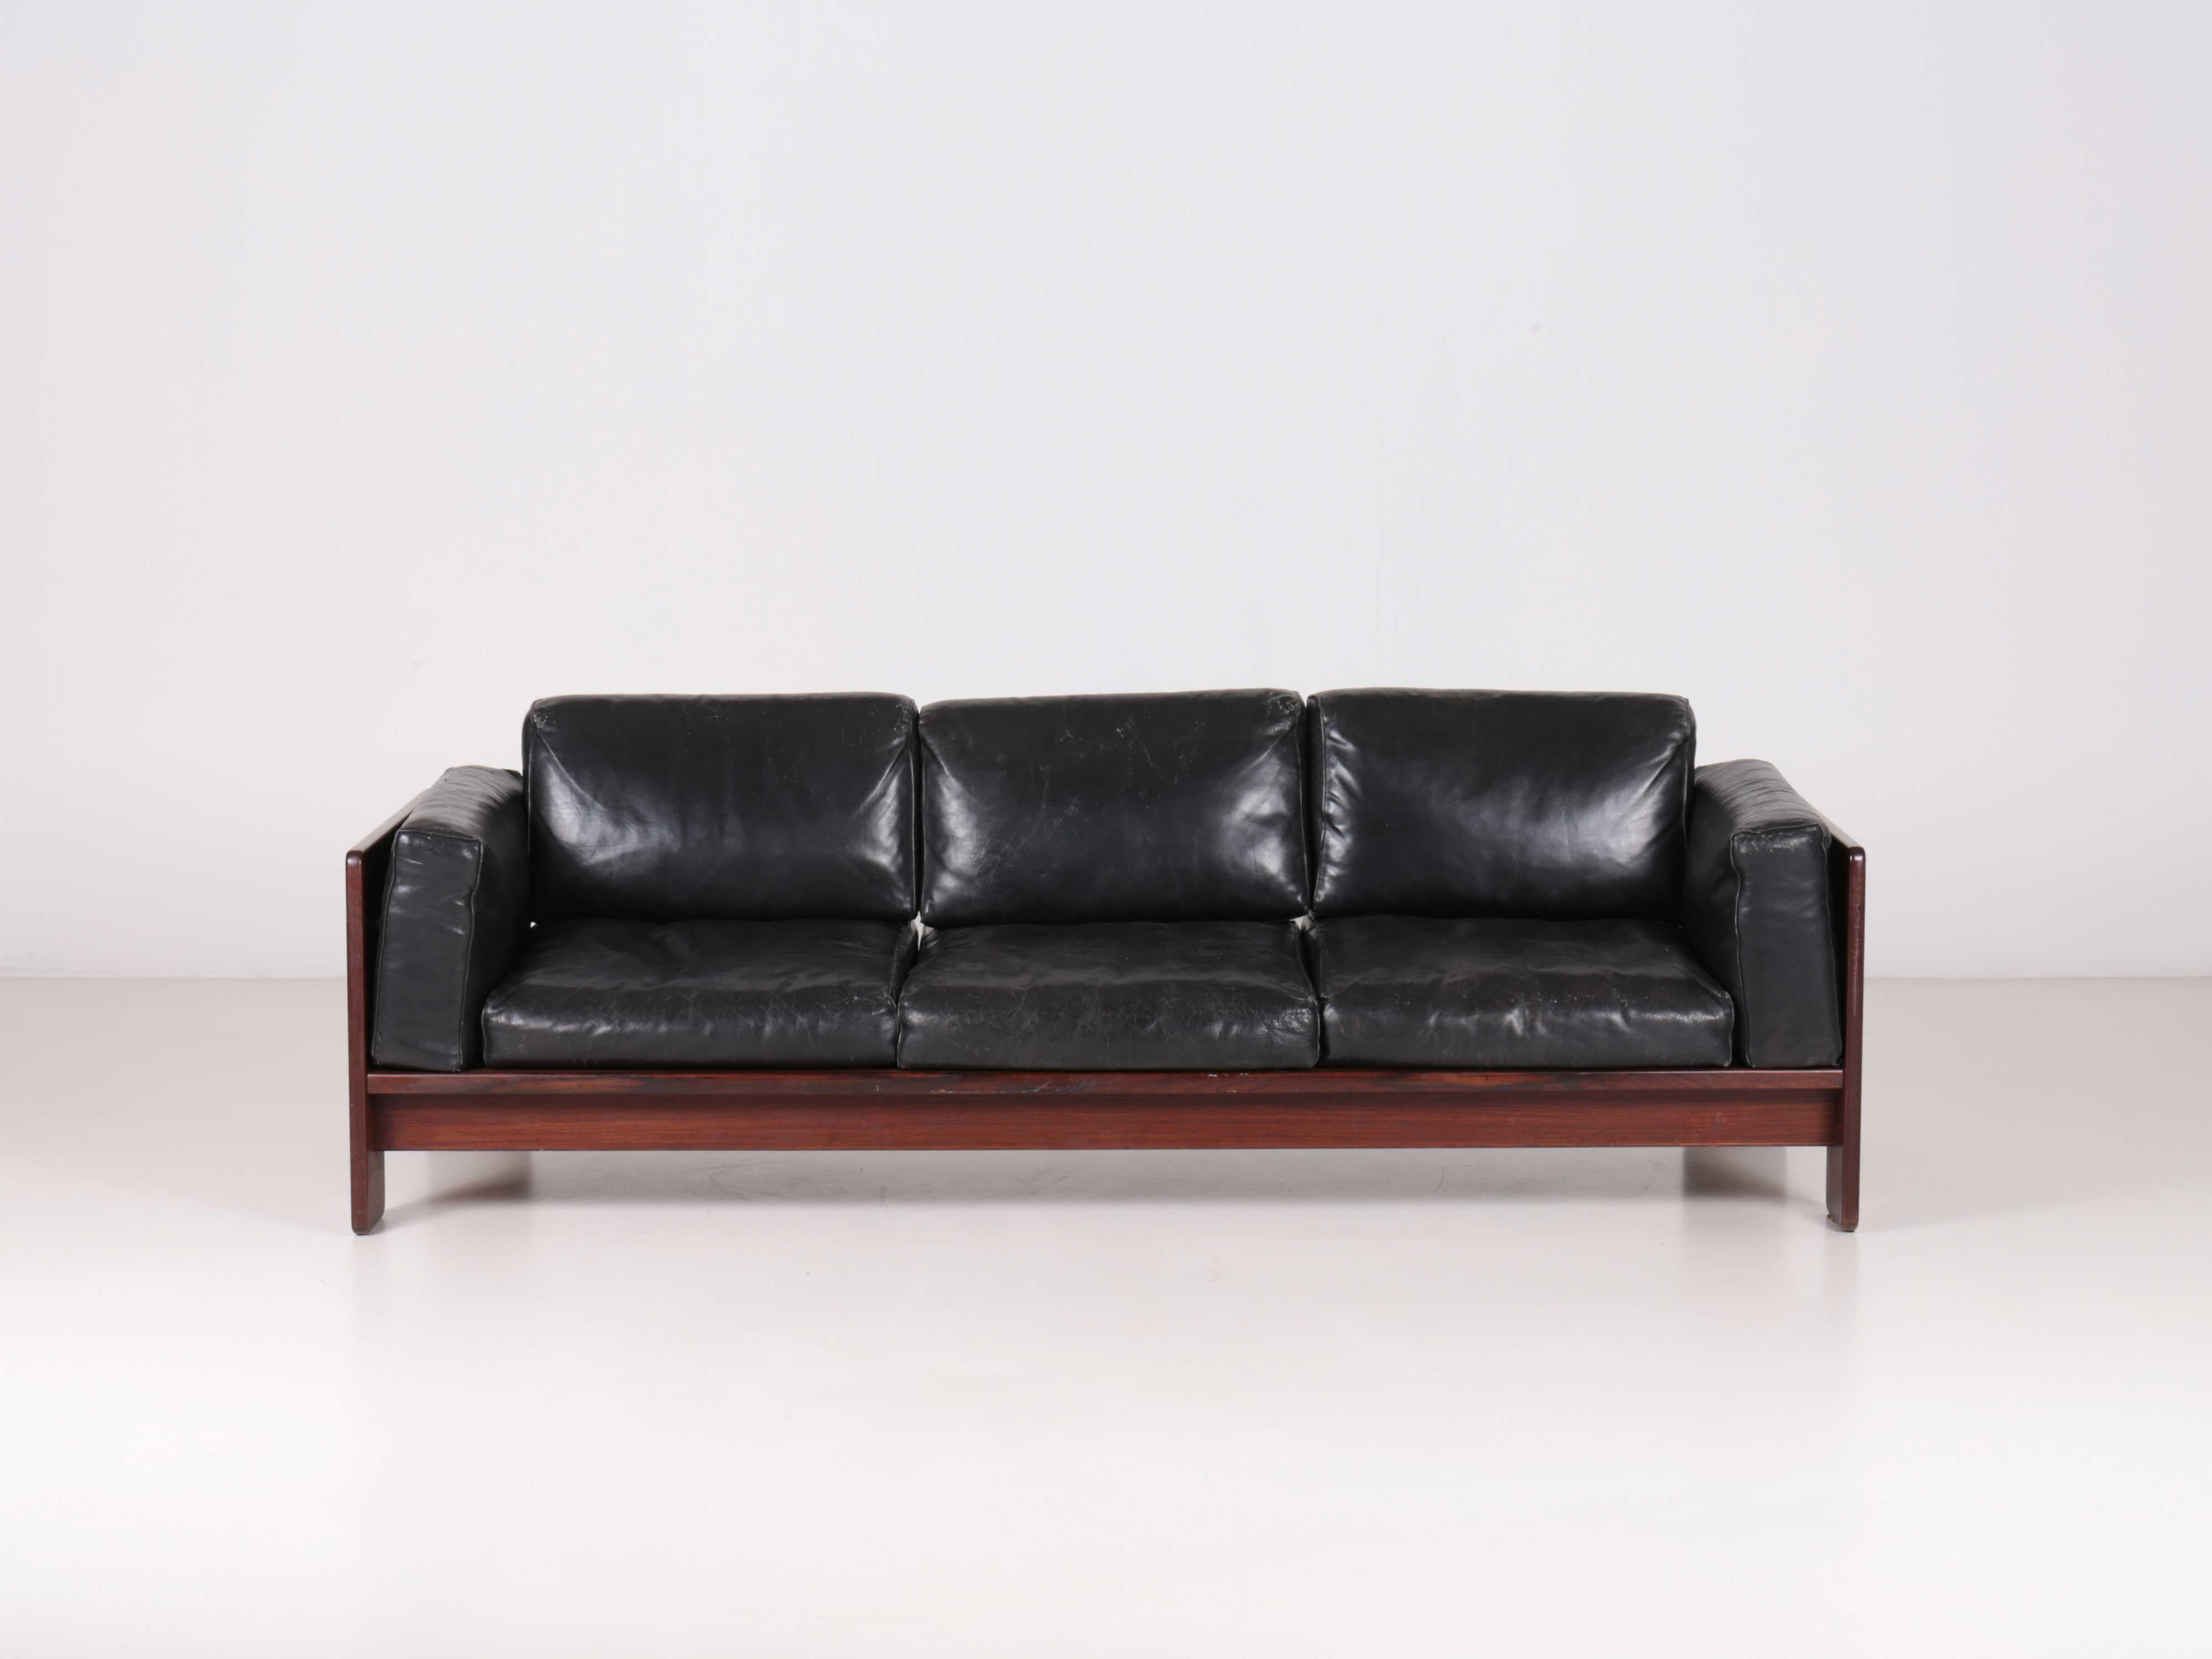 Supporting structure in rosewood. Flying cushions with polyurethane bottom and top in feather on covered steel elastic straps. Original upholstery in leather. A simple wooden frame for a leather “classic sofa” which no longer needed an upholsterer